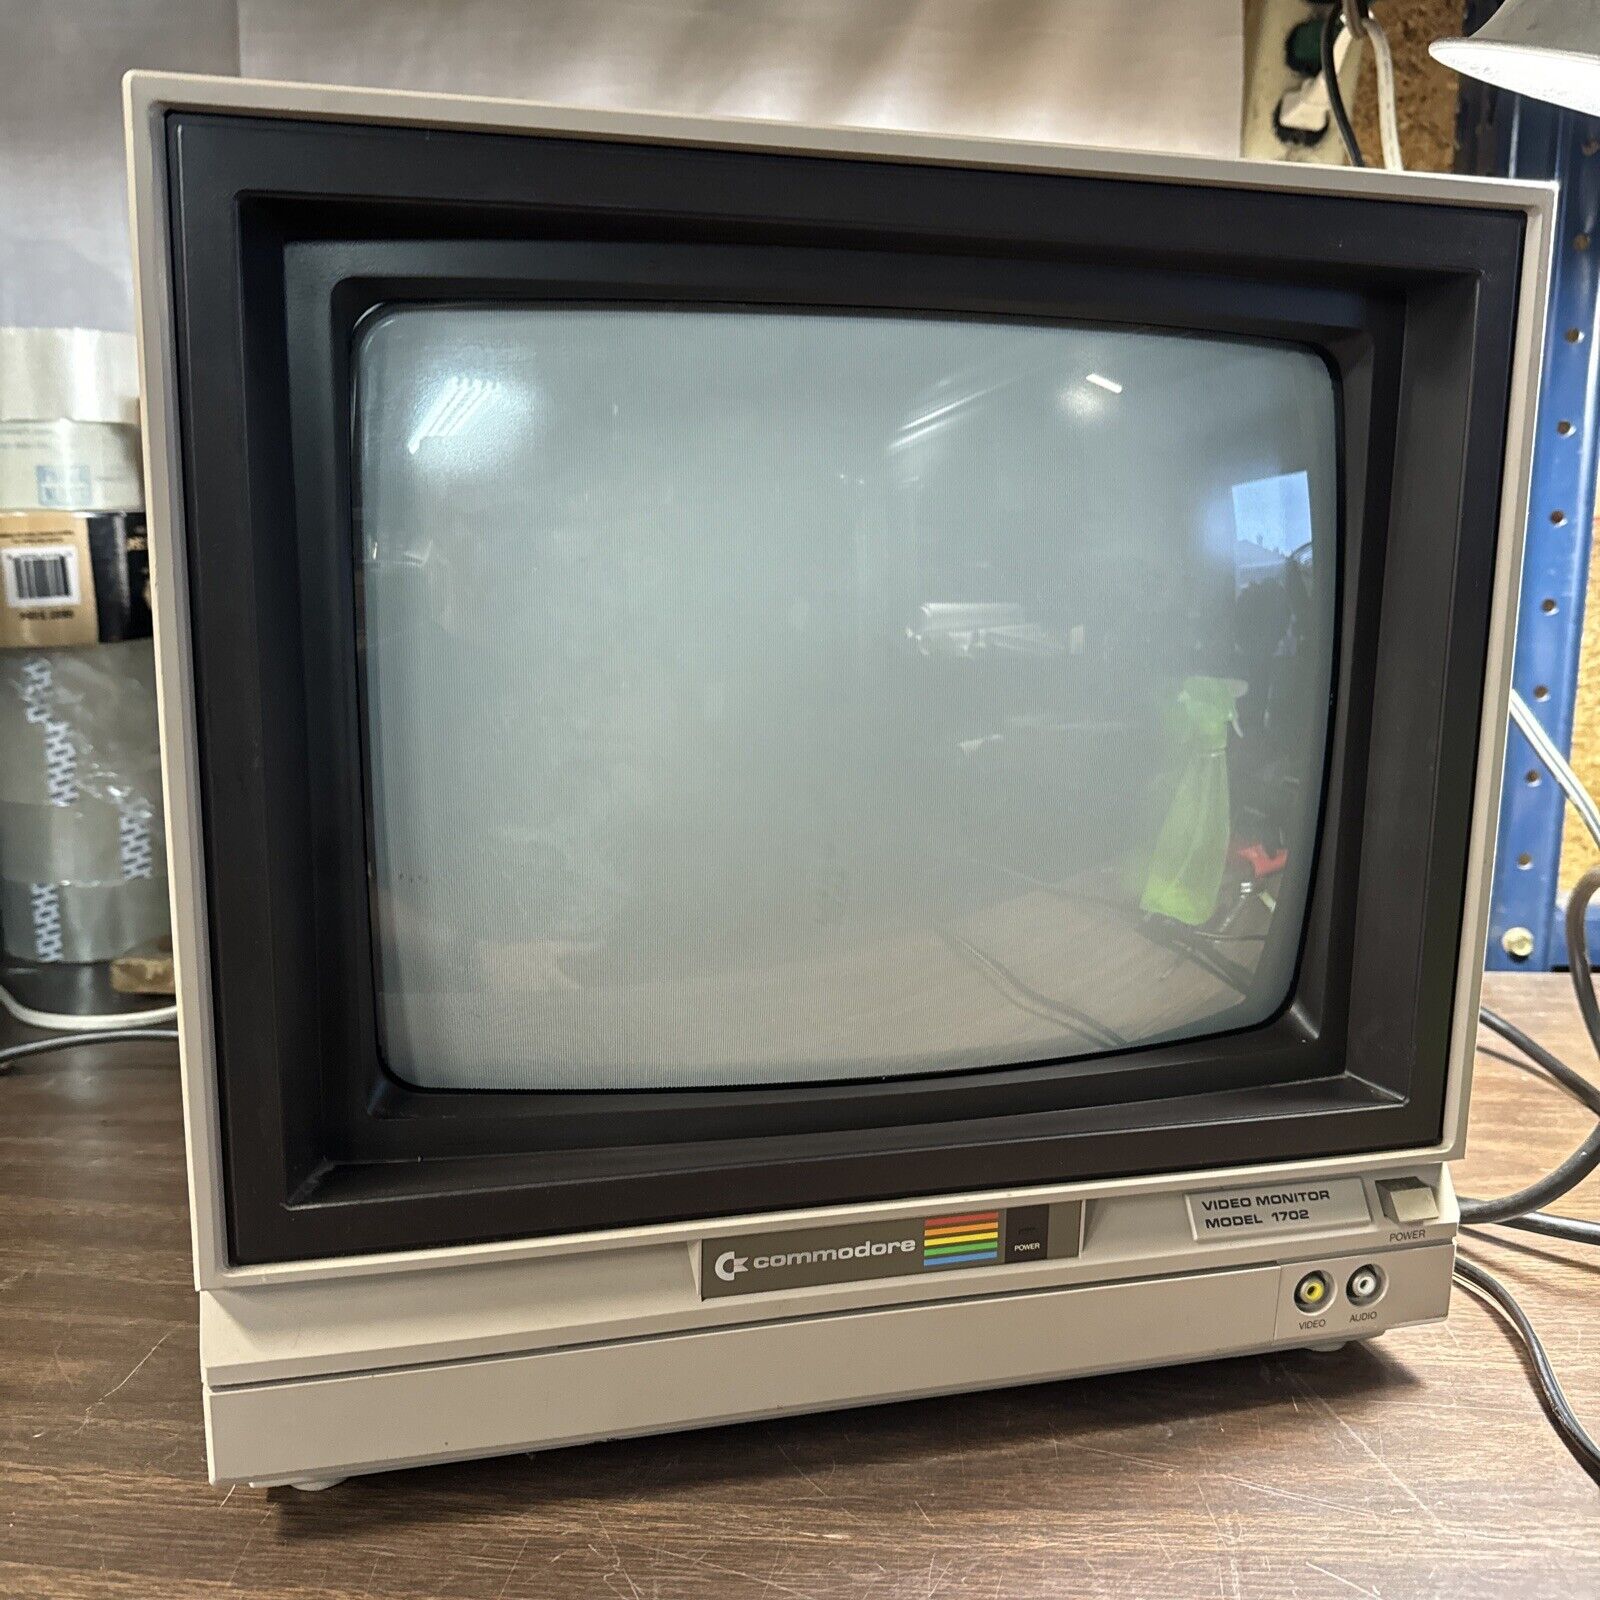 VTG 1984 Commodore 64 Home Computer PC Color  Video Monitor Model 1702 - Tested